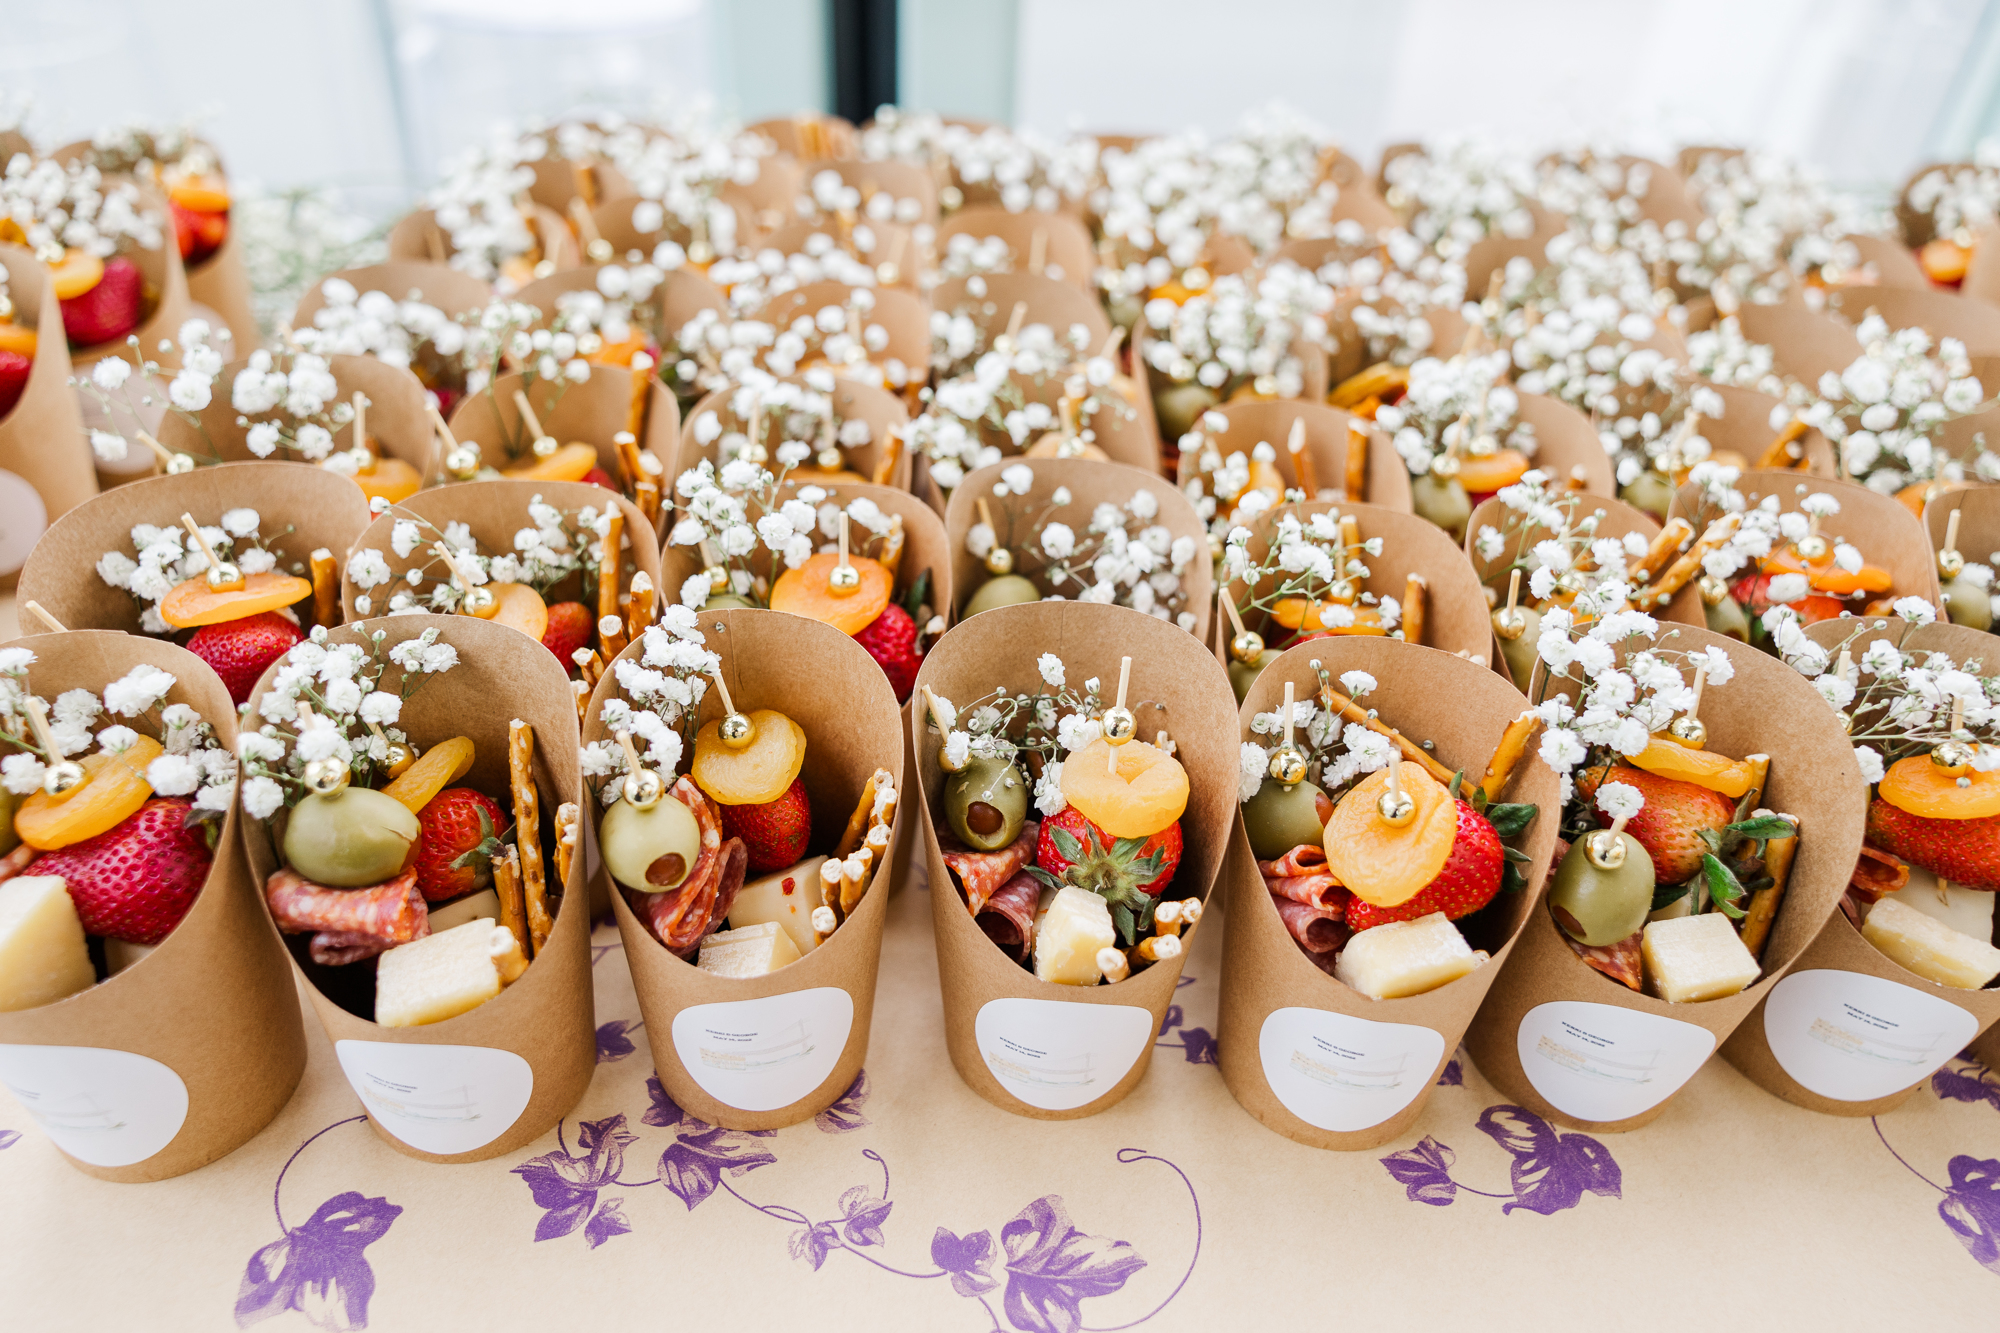 Perfect local wedding favors in Beacon